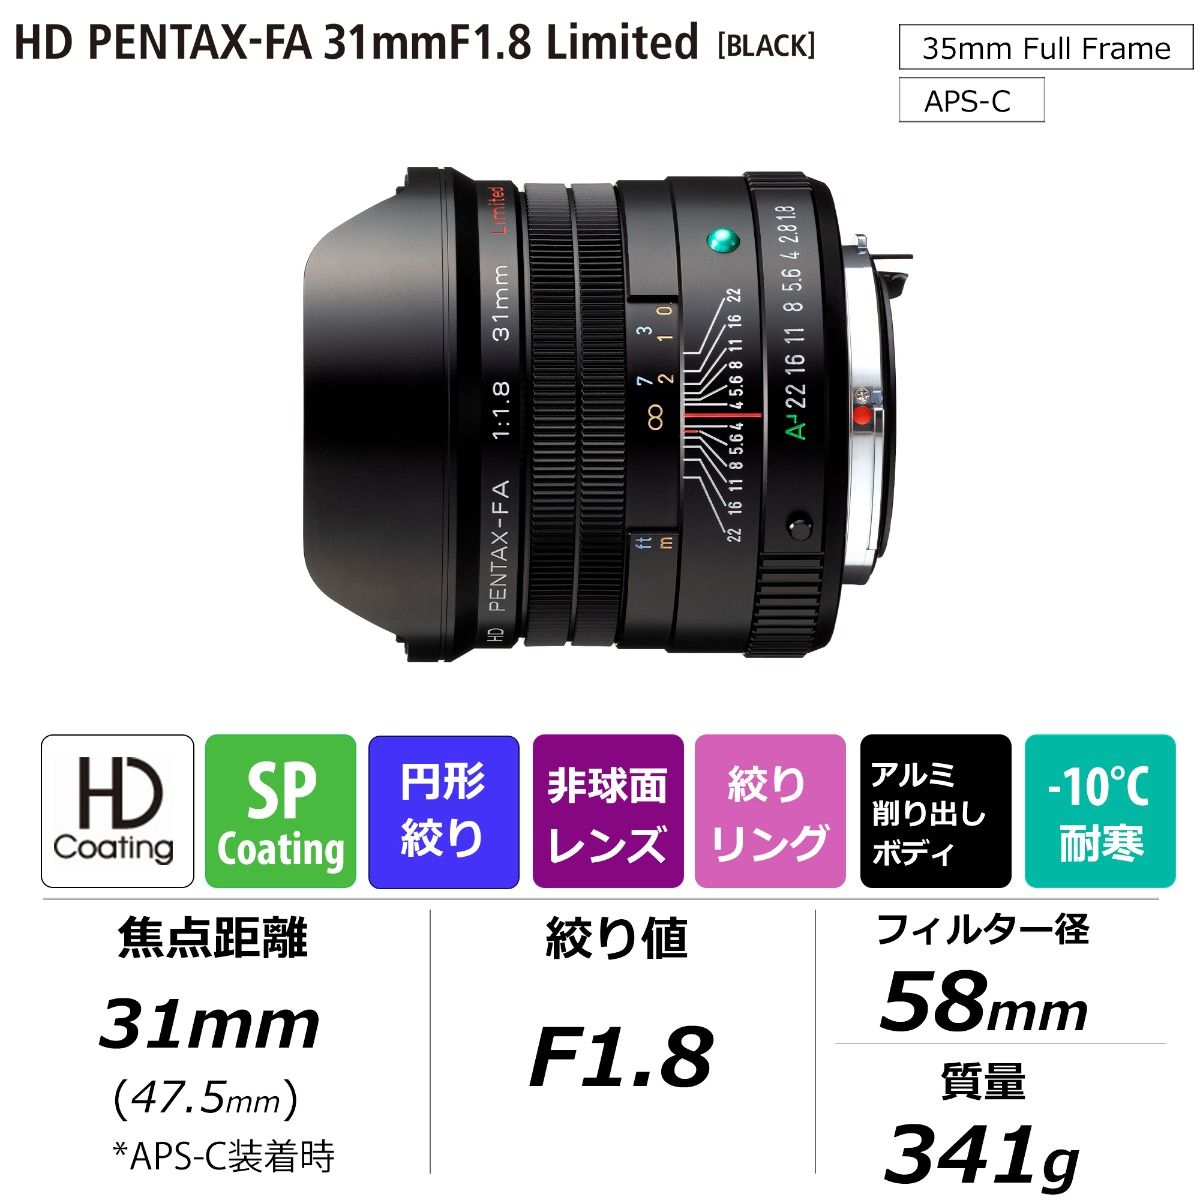 Prices of the new HD PENTAX-FA Limited lenses and K-1 Mark II J